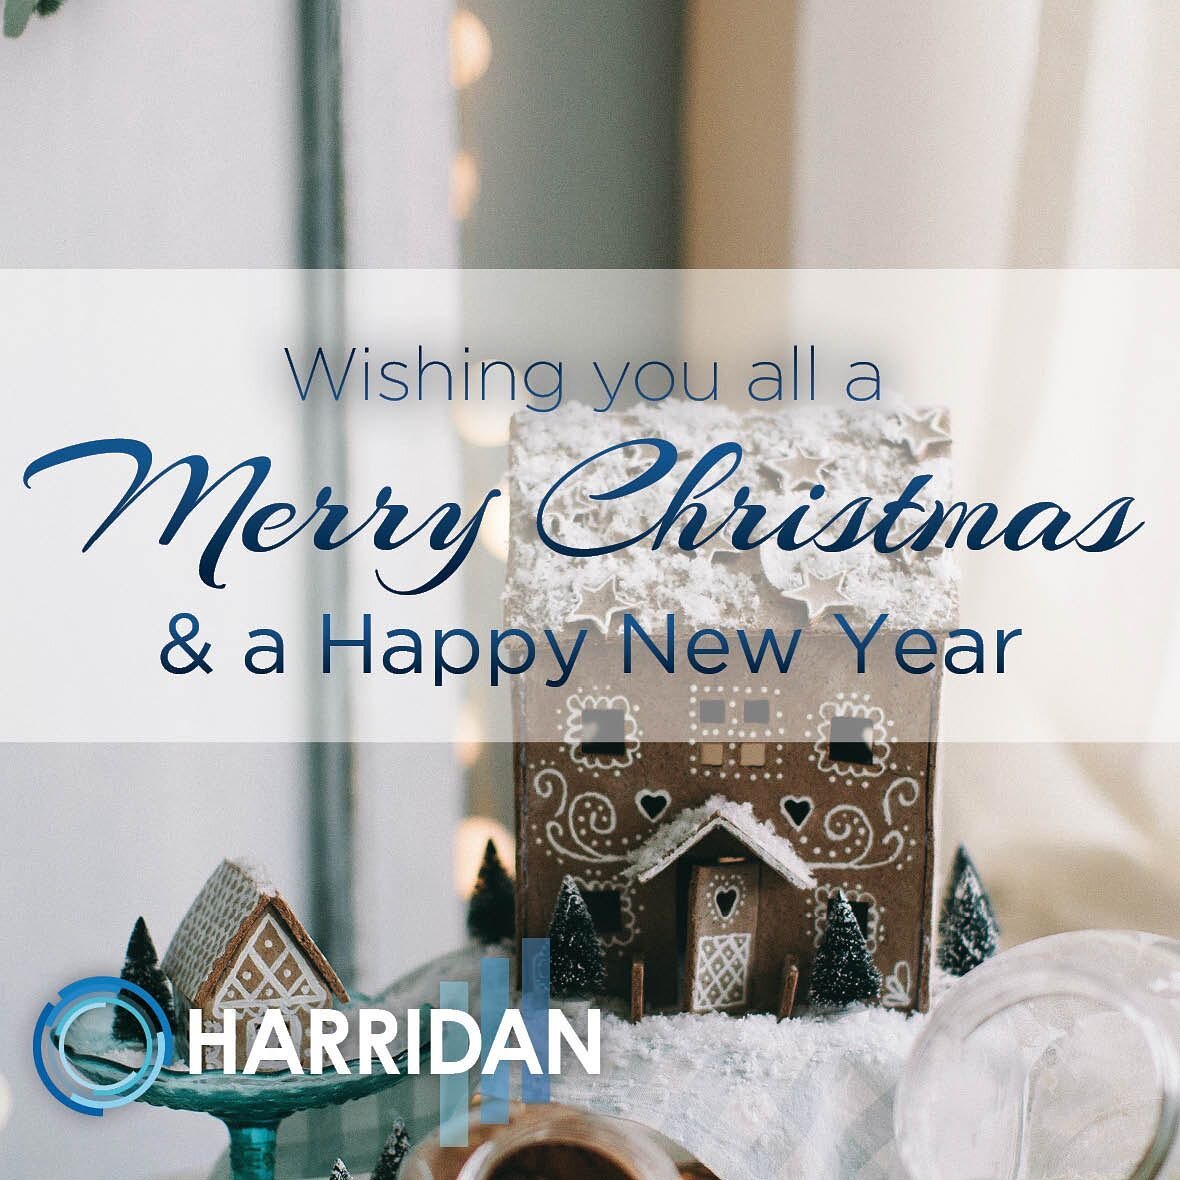 Wishing everyone a happy holiday and a merry Christmas! Harridan will be back on the 28th of December to help see the year out. Bring on 2021! 🙌🏻🏡